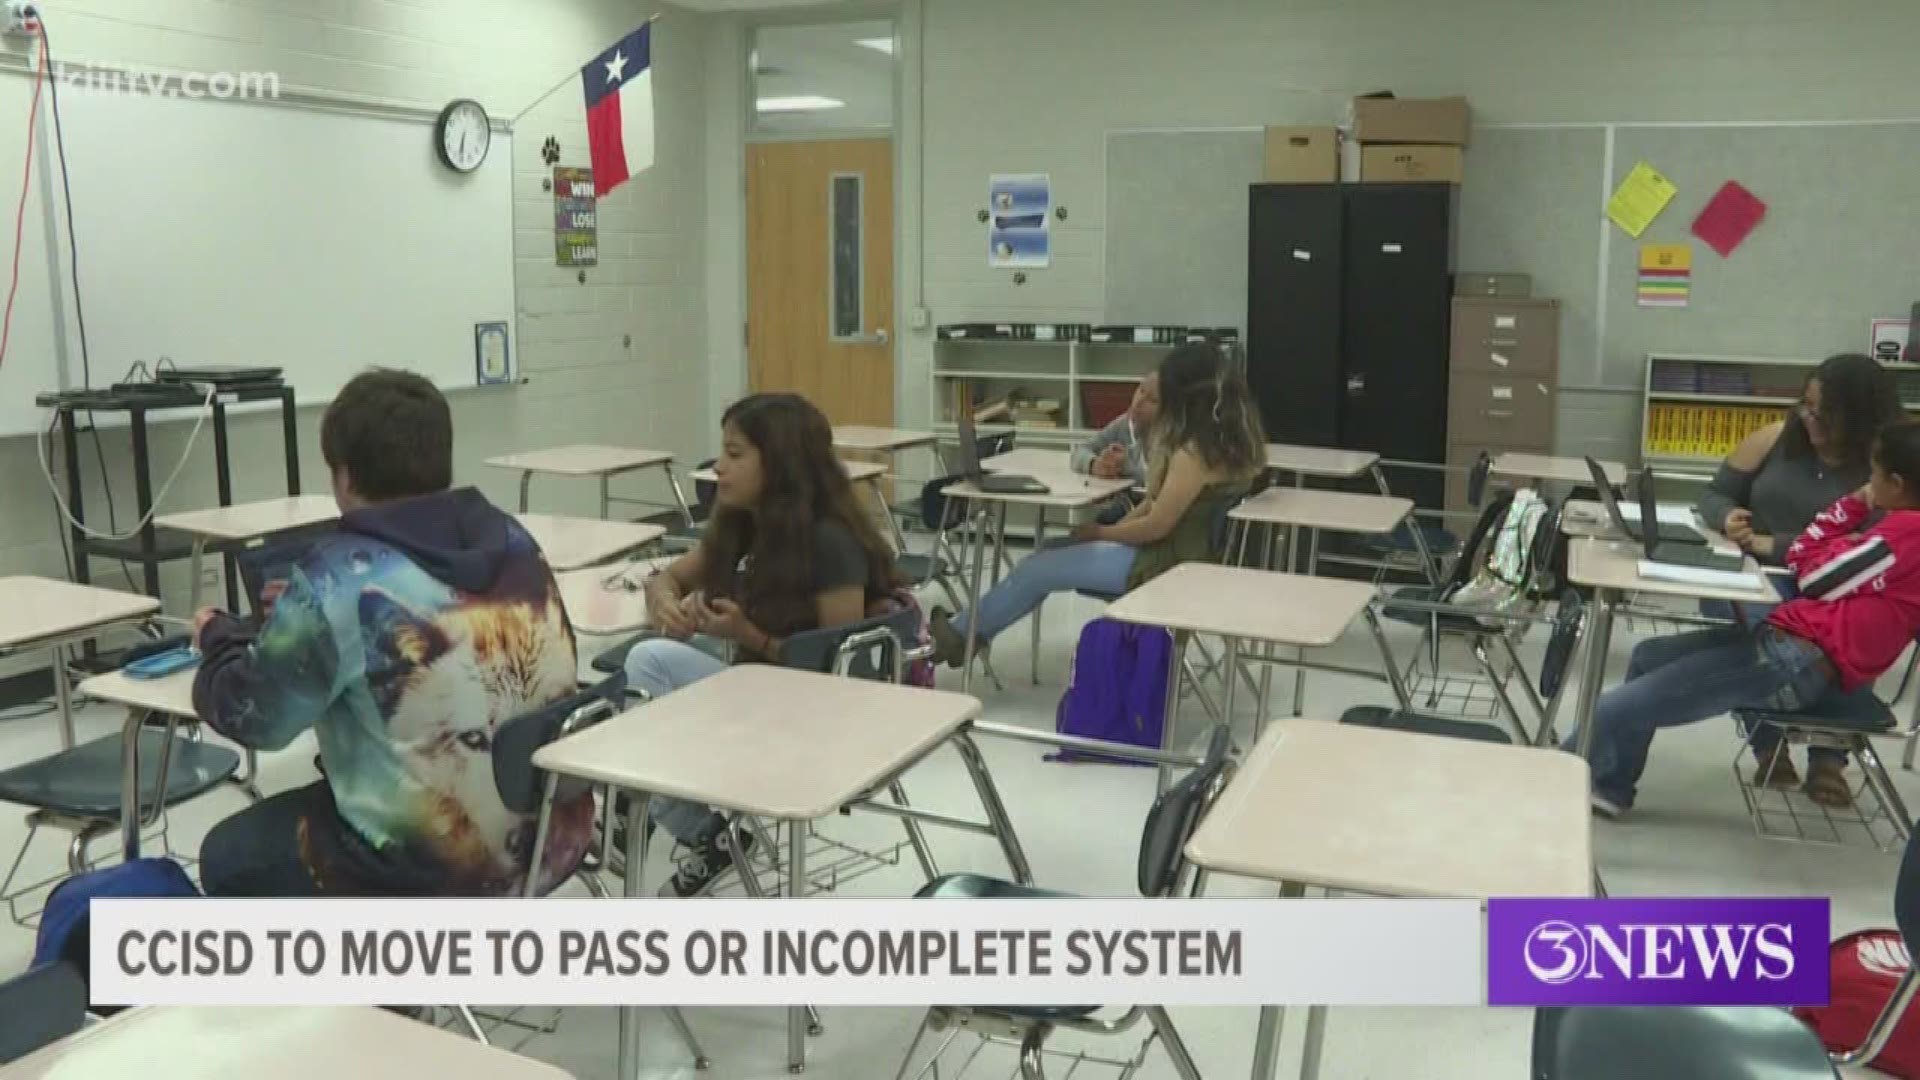 CCISD is still trying to get in touch some some 1, 500 students for distance learning.